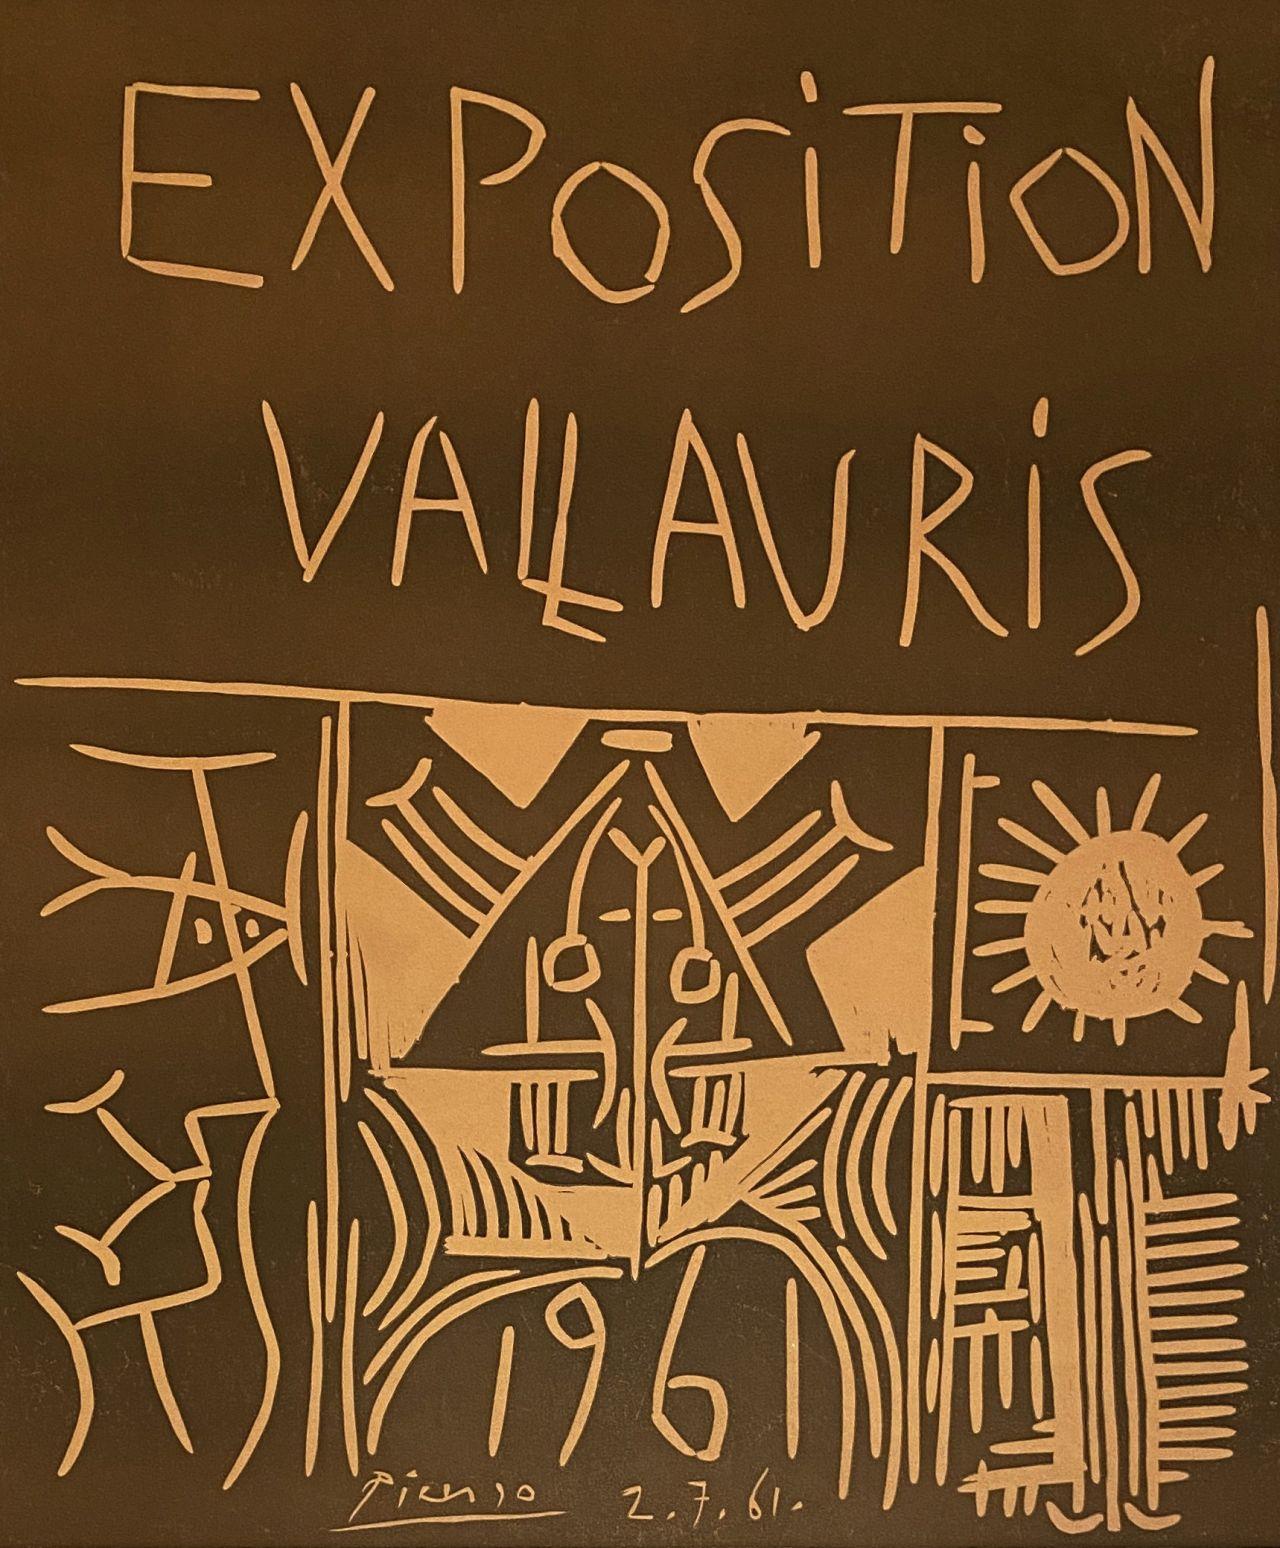 Exposition Vallauris 1961 - Original Linocut Signed in the Plate - Bloch 1295 - Print by Pablo Picasso